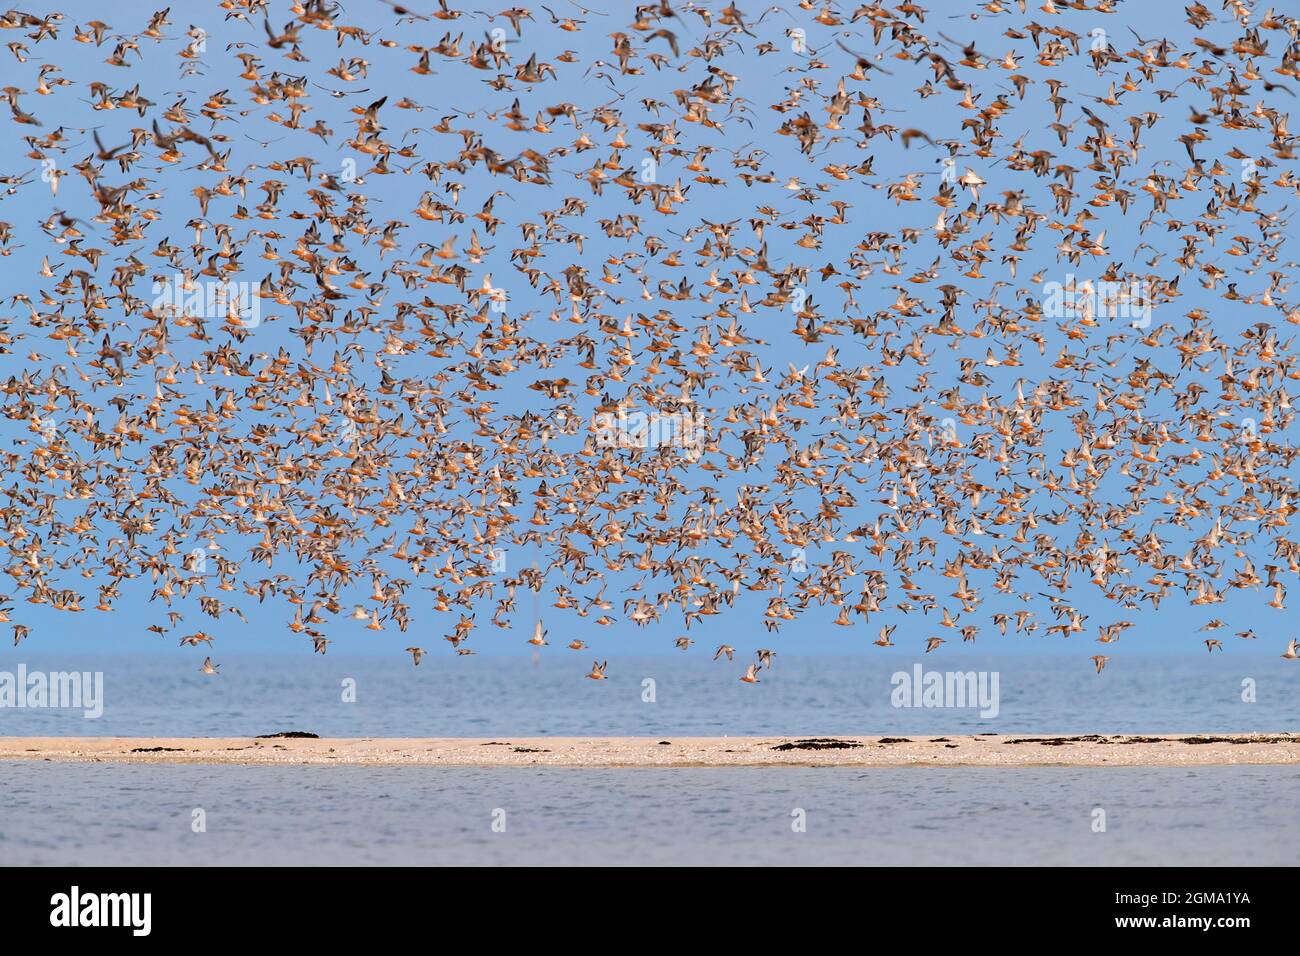 Red knot (Calidris canutus) flock of red knots in breeding plumage flying over beach along the Schleswig-Holstein Wadden Sea National Park, Germany Stock Photo